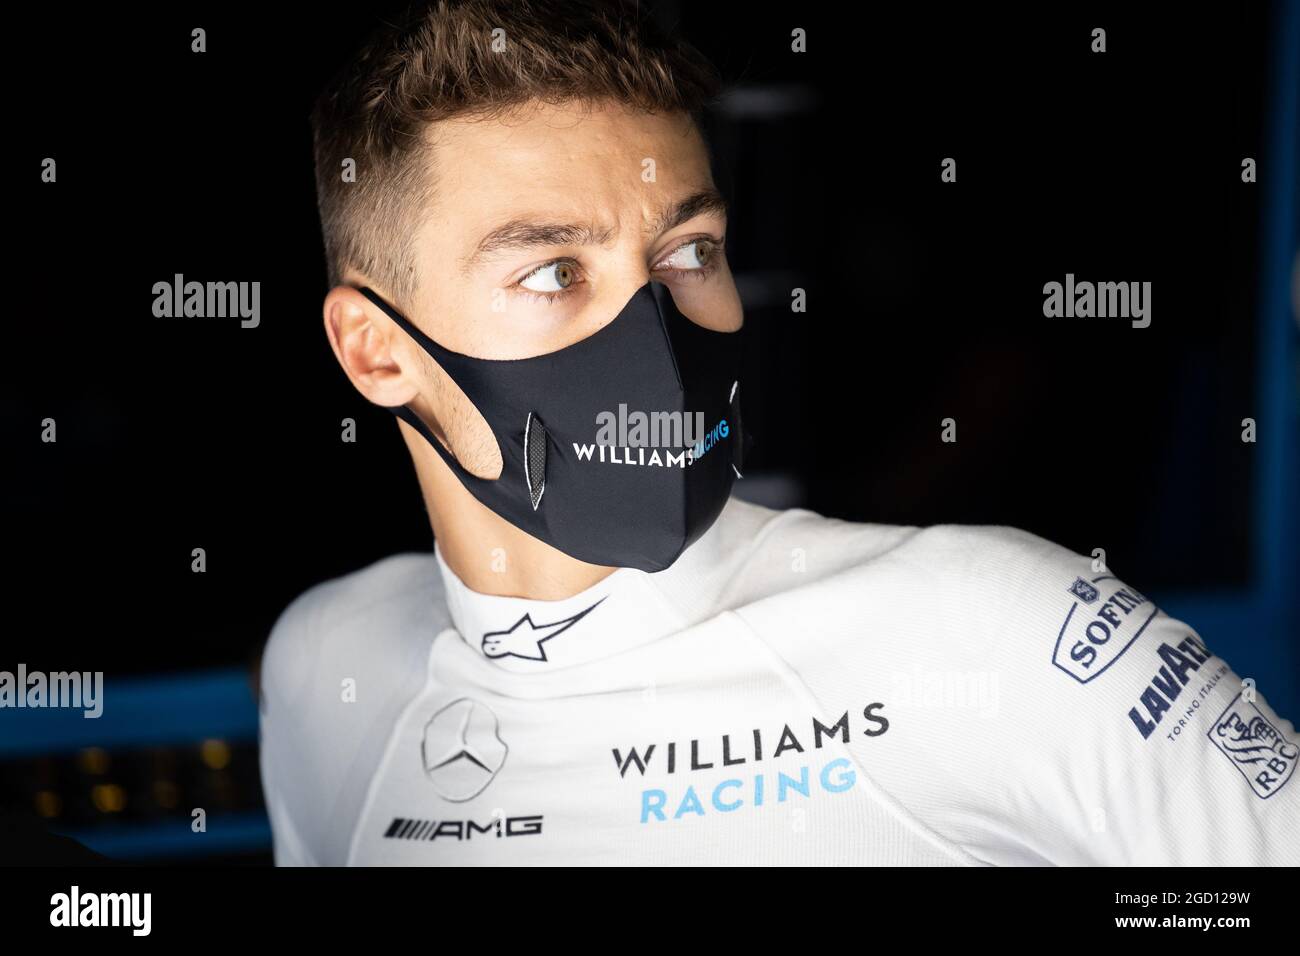 George Russell (GBR) Williams Racing. Italian Grand Prix, Friday 4th September 2020. Monza Italy. Stock Photo